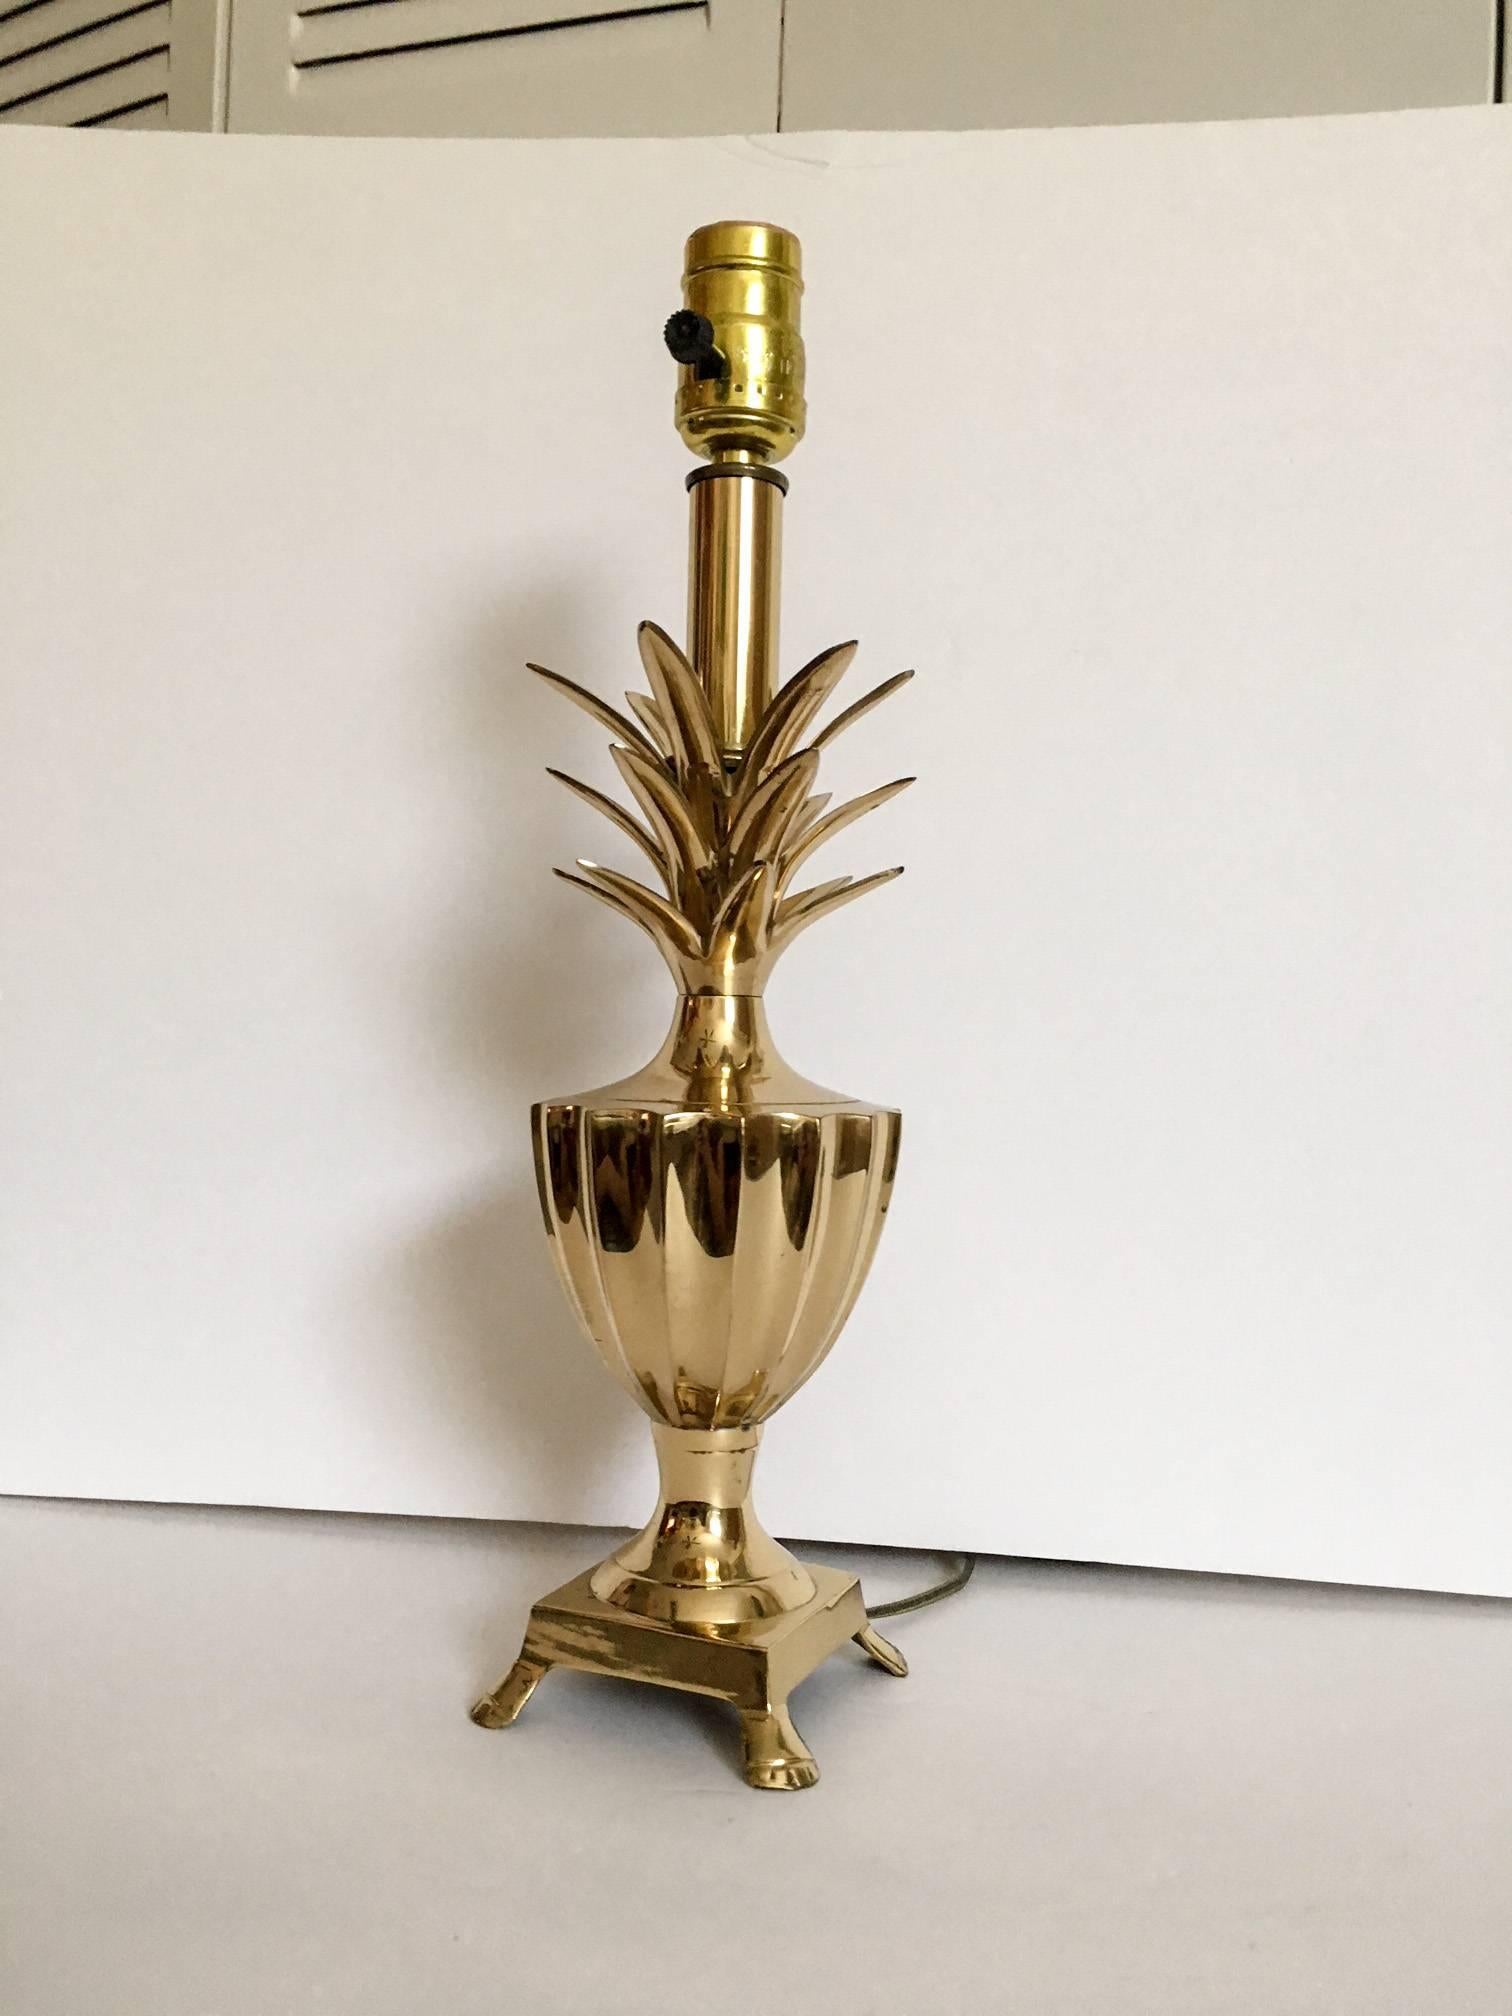 Solid lacquered brass pineapple shaped accent lamp on a footed base. Lamp uses a standard light bulb; 60W candle tip bulb recommended. A clip on shade will be needed for this piece. Original wiring in working condition.